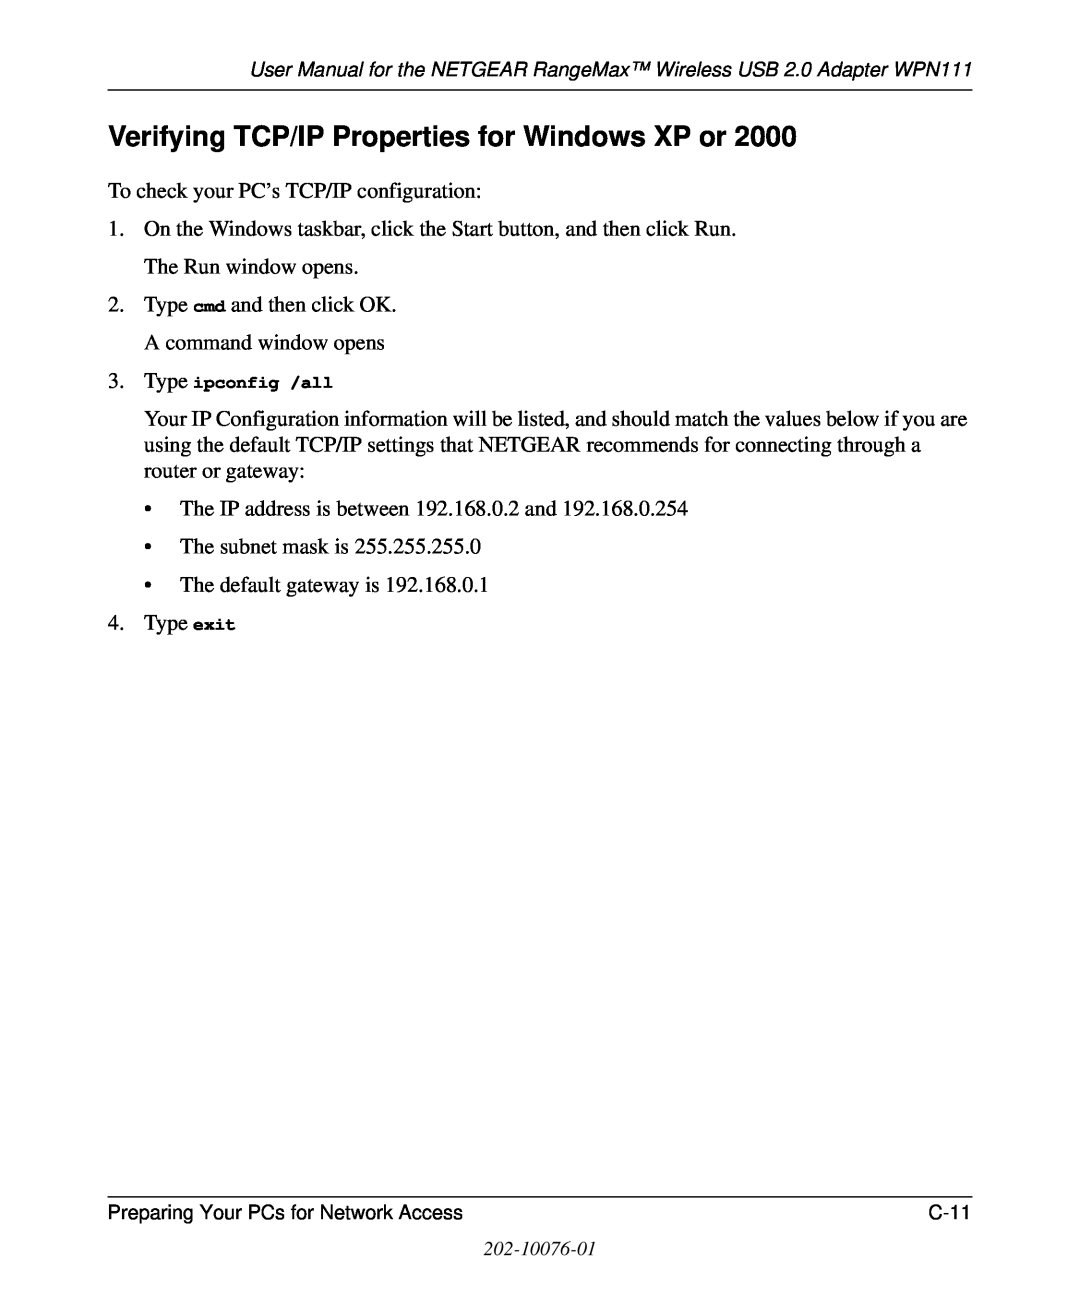 NETGEAR WPN111 user manual Verifying TCP/IP Properties for Windows XP or, Type ipconfig /all 